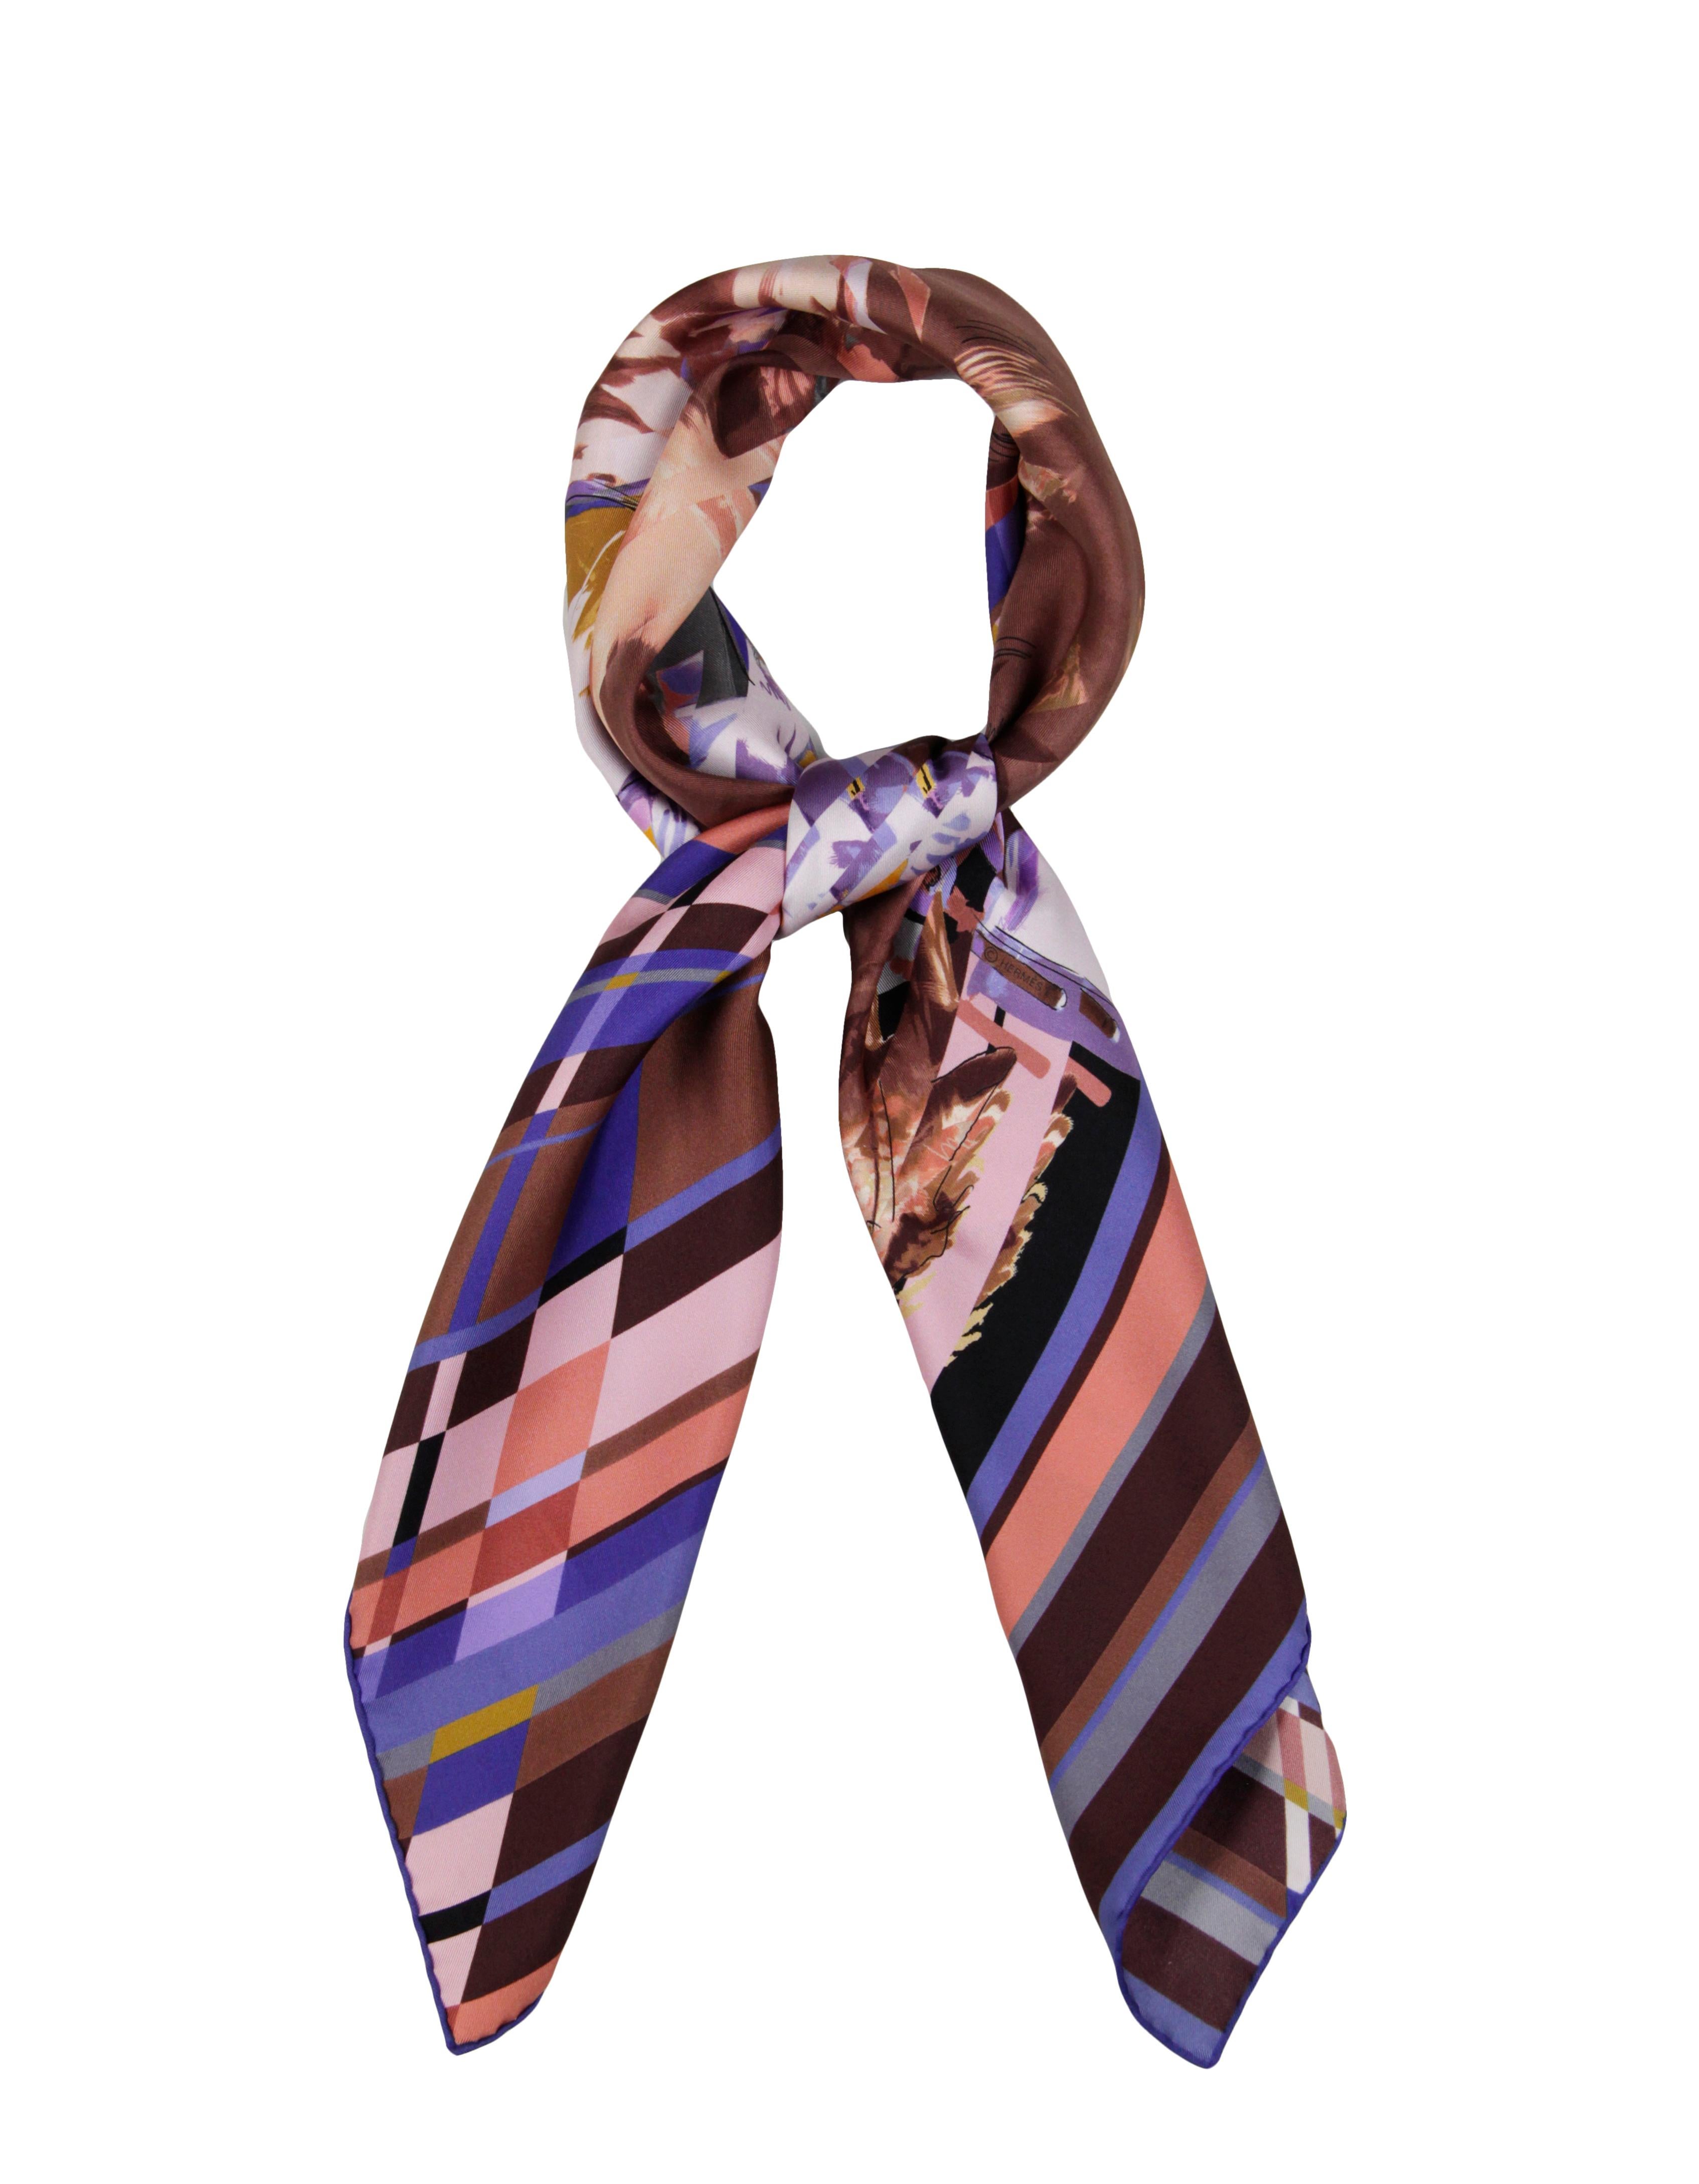 Hermes Multicolor Photo Finish 90cm Silk Scarf Designed by Dimitri Rybaltchenko

Made In: France
Color: Multicolor- pink, black, brown, blue, purple
Materials: 100% Silk
Overall Condition: Very good. Small pull (see photo) and missing composition